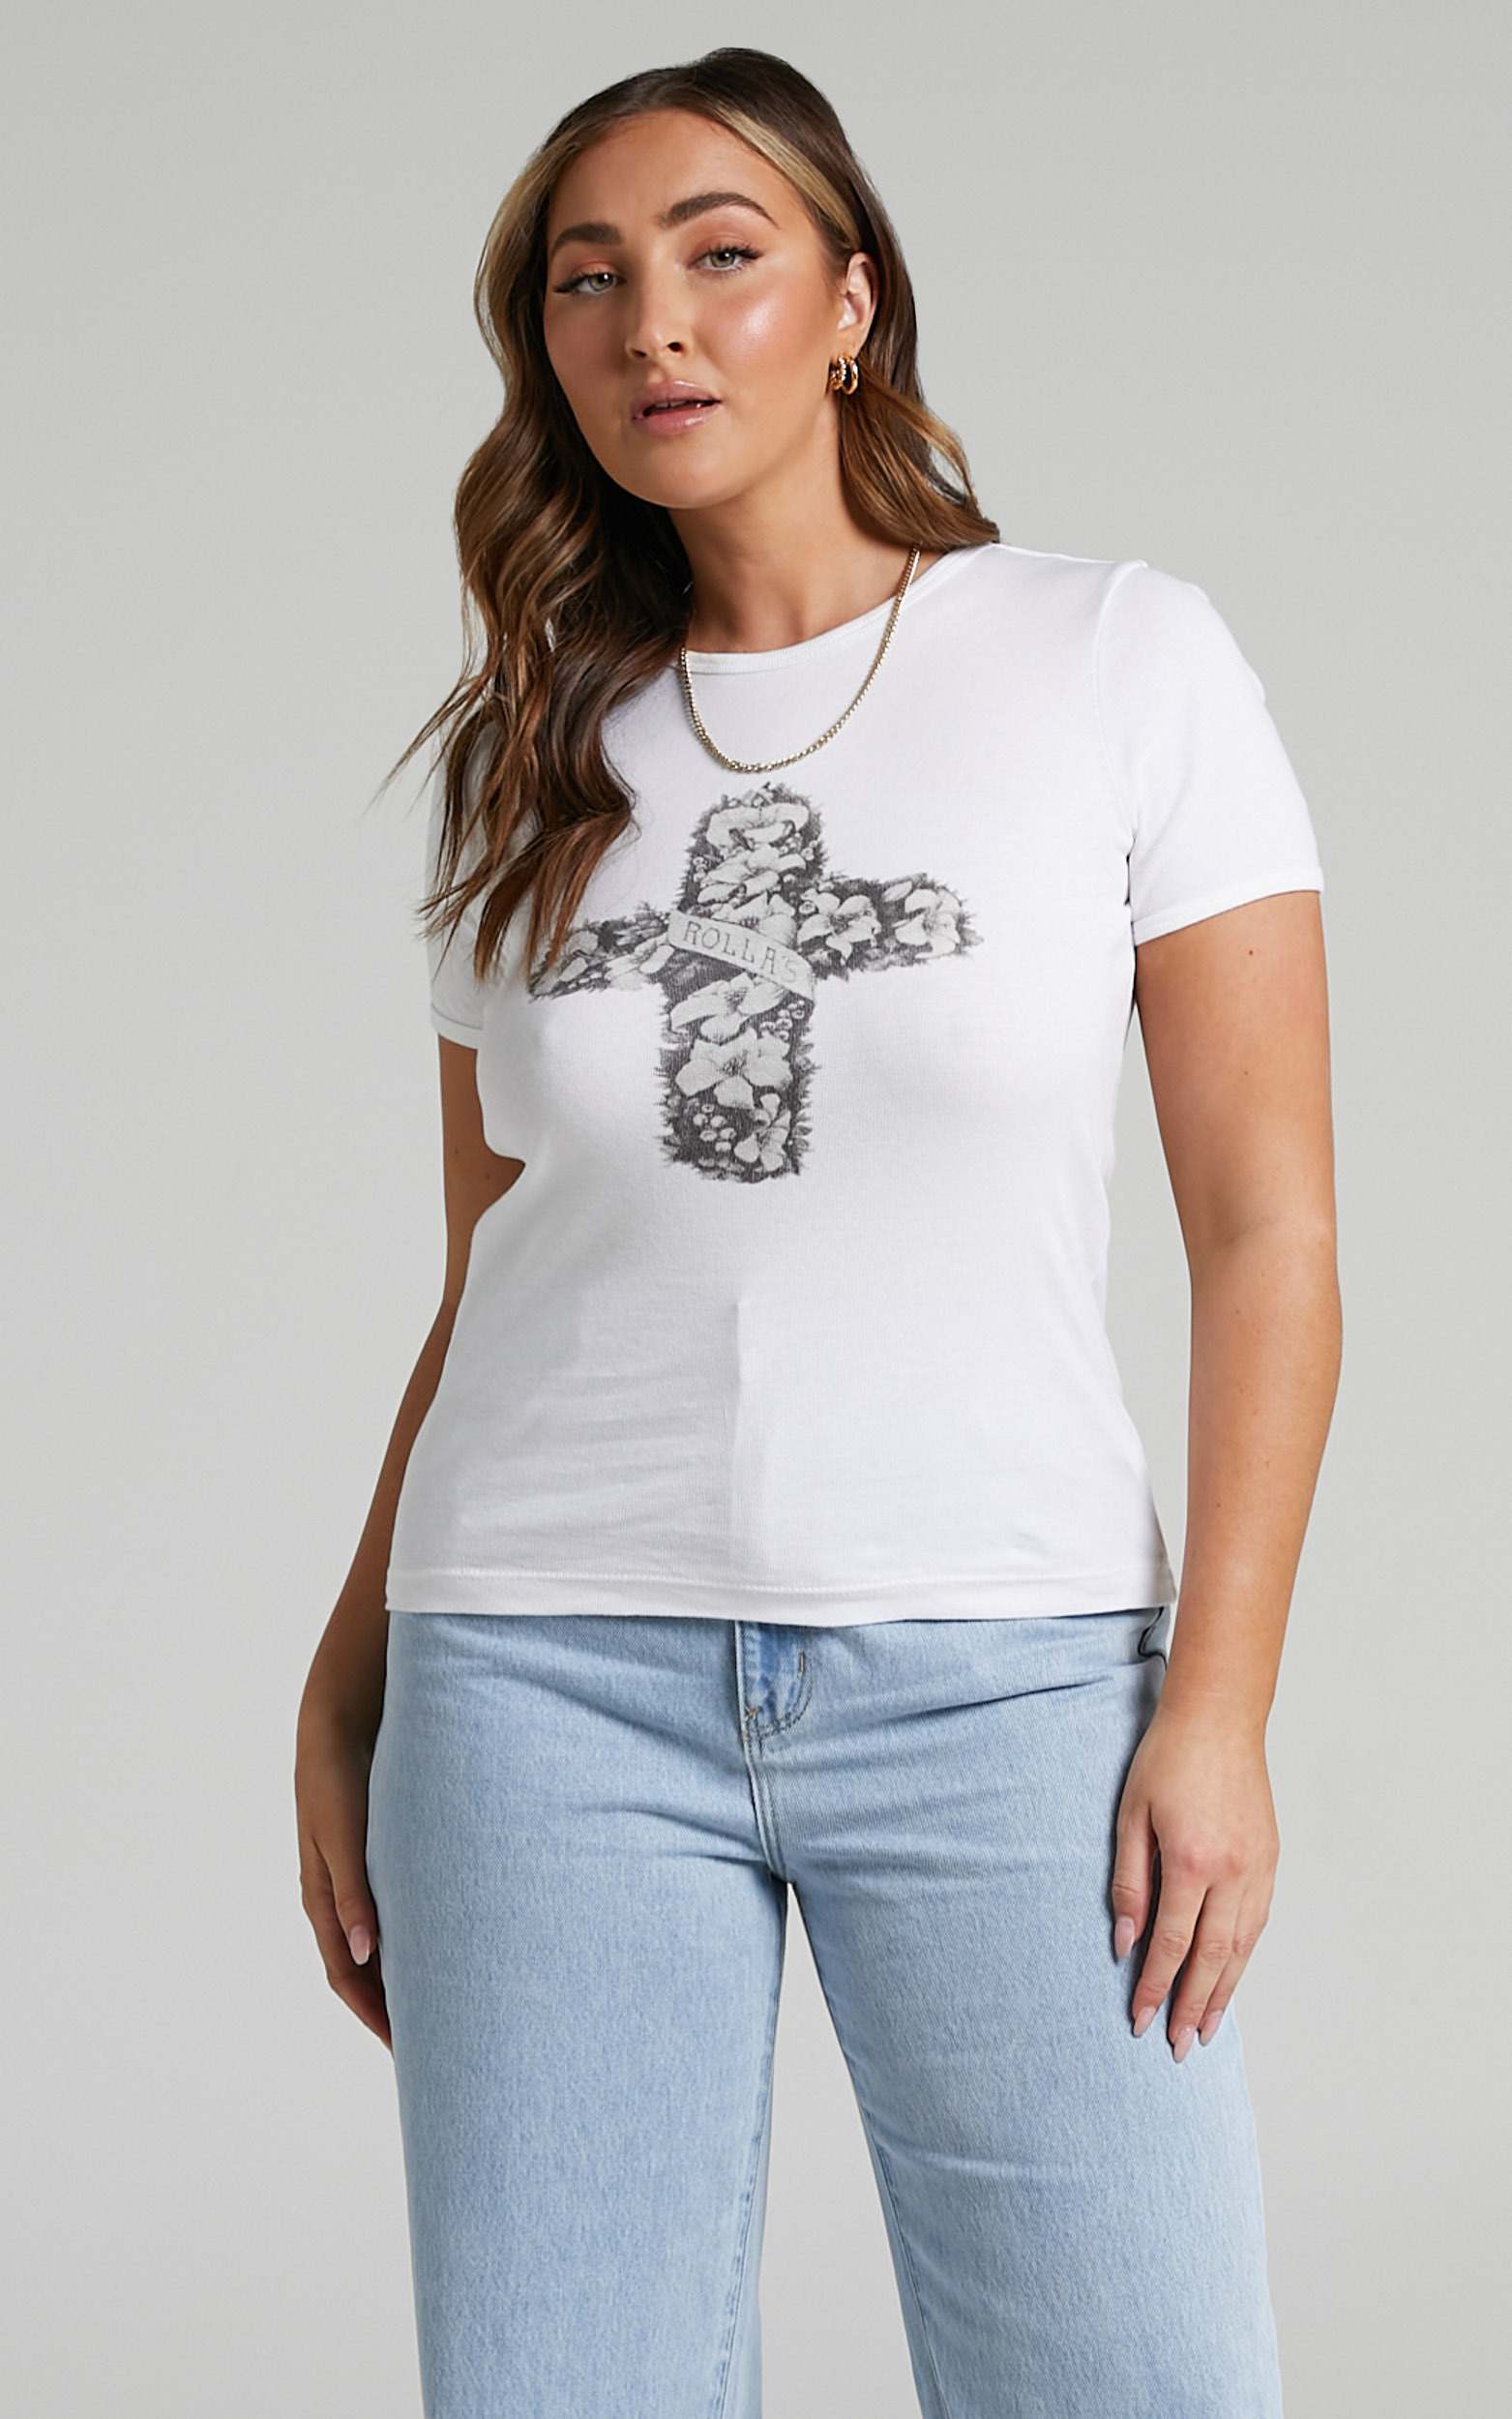 Rolla's - FLORAL CROSS TIGHT RIB TEE in White - 06, WHT1, hi-res image number null